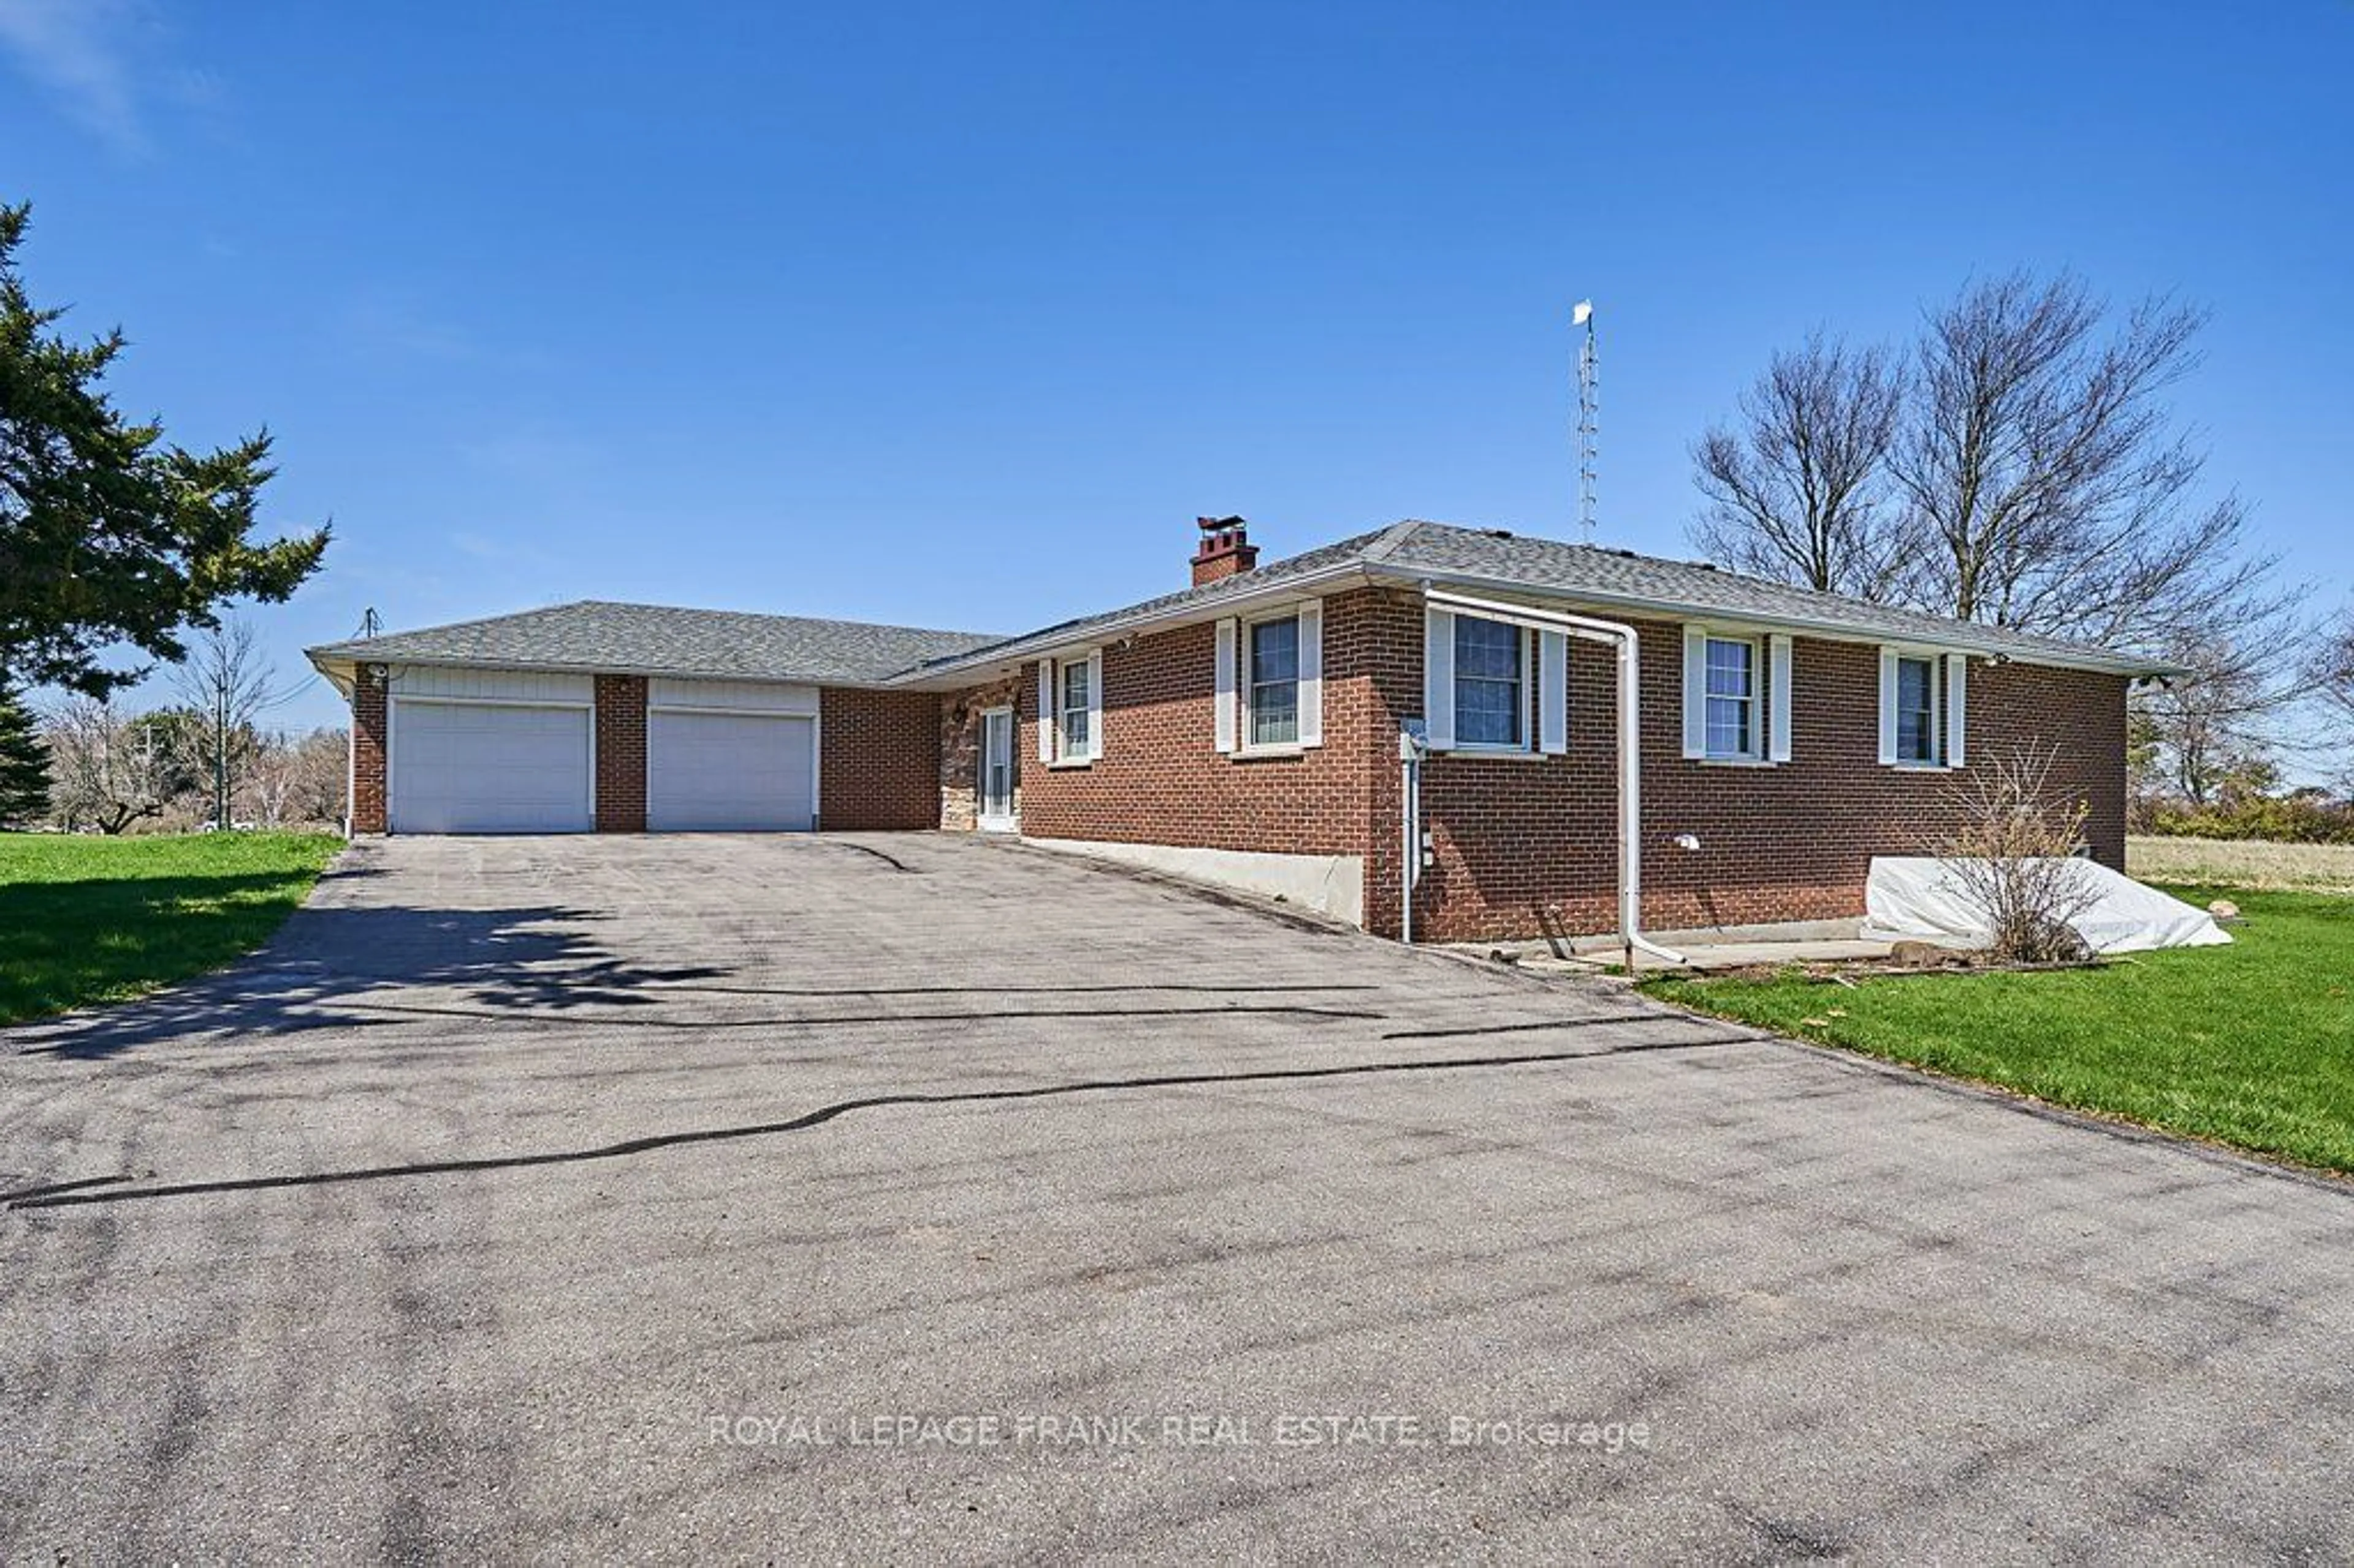 Frontside or backside of a home for 1821 Shirley Rd, Scugog Ontario L9L 1B3